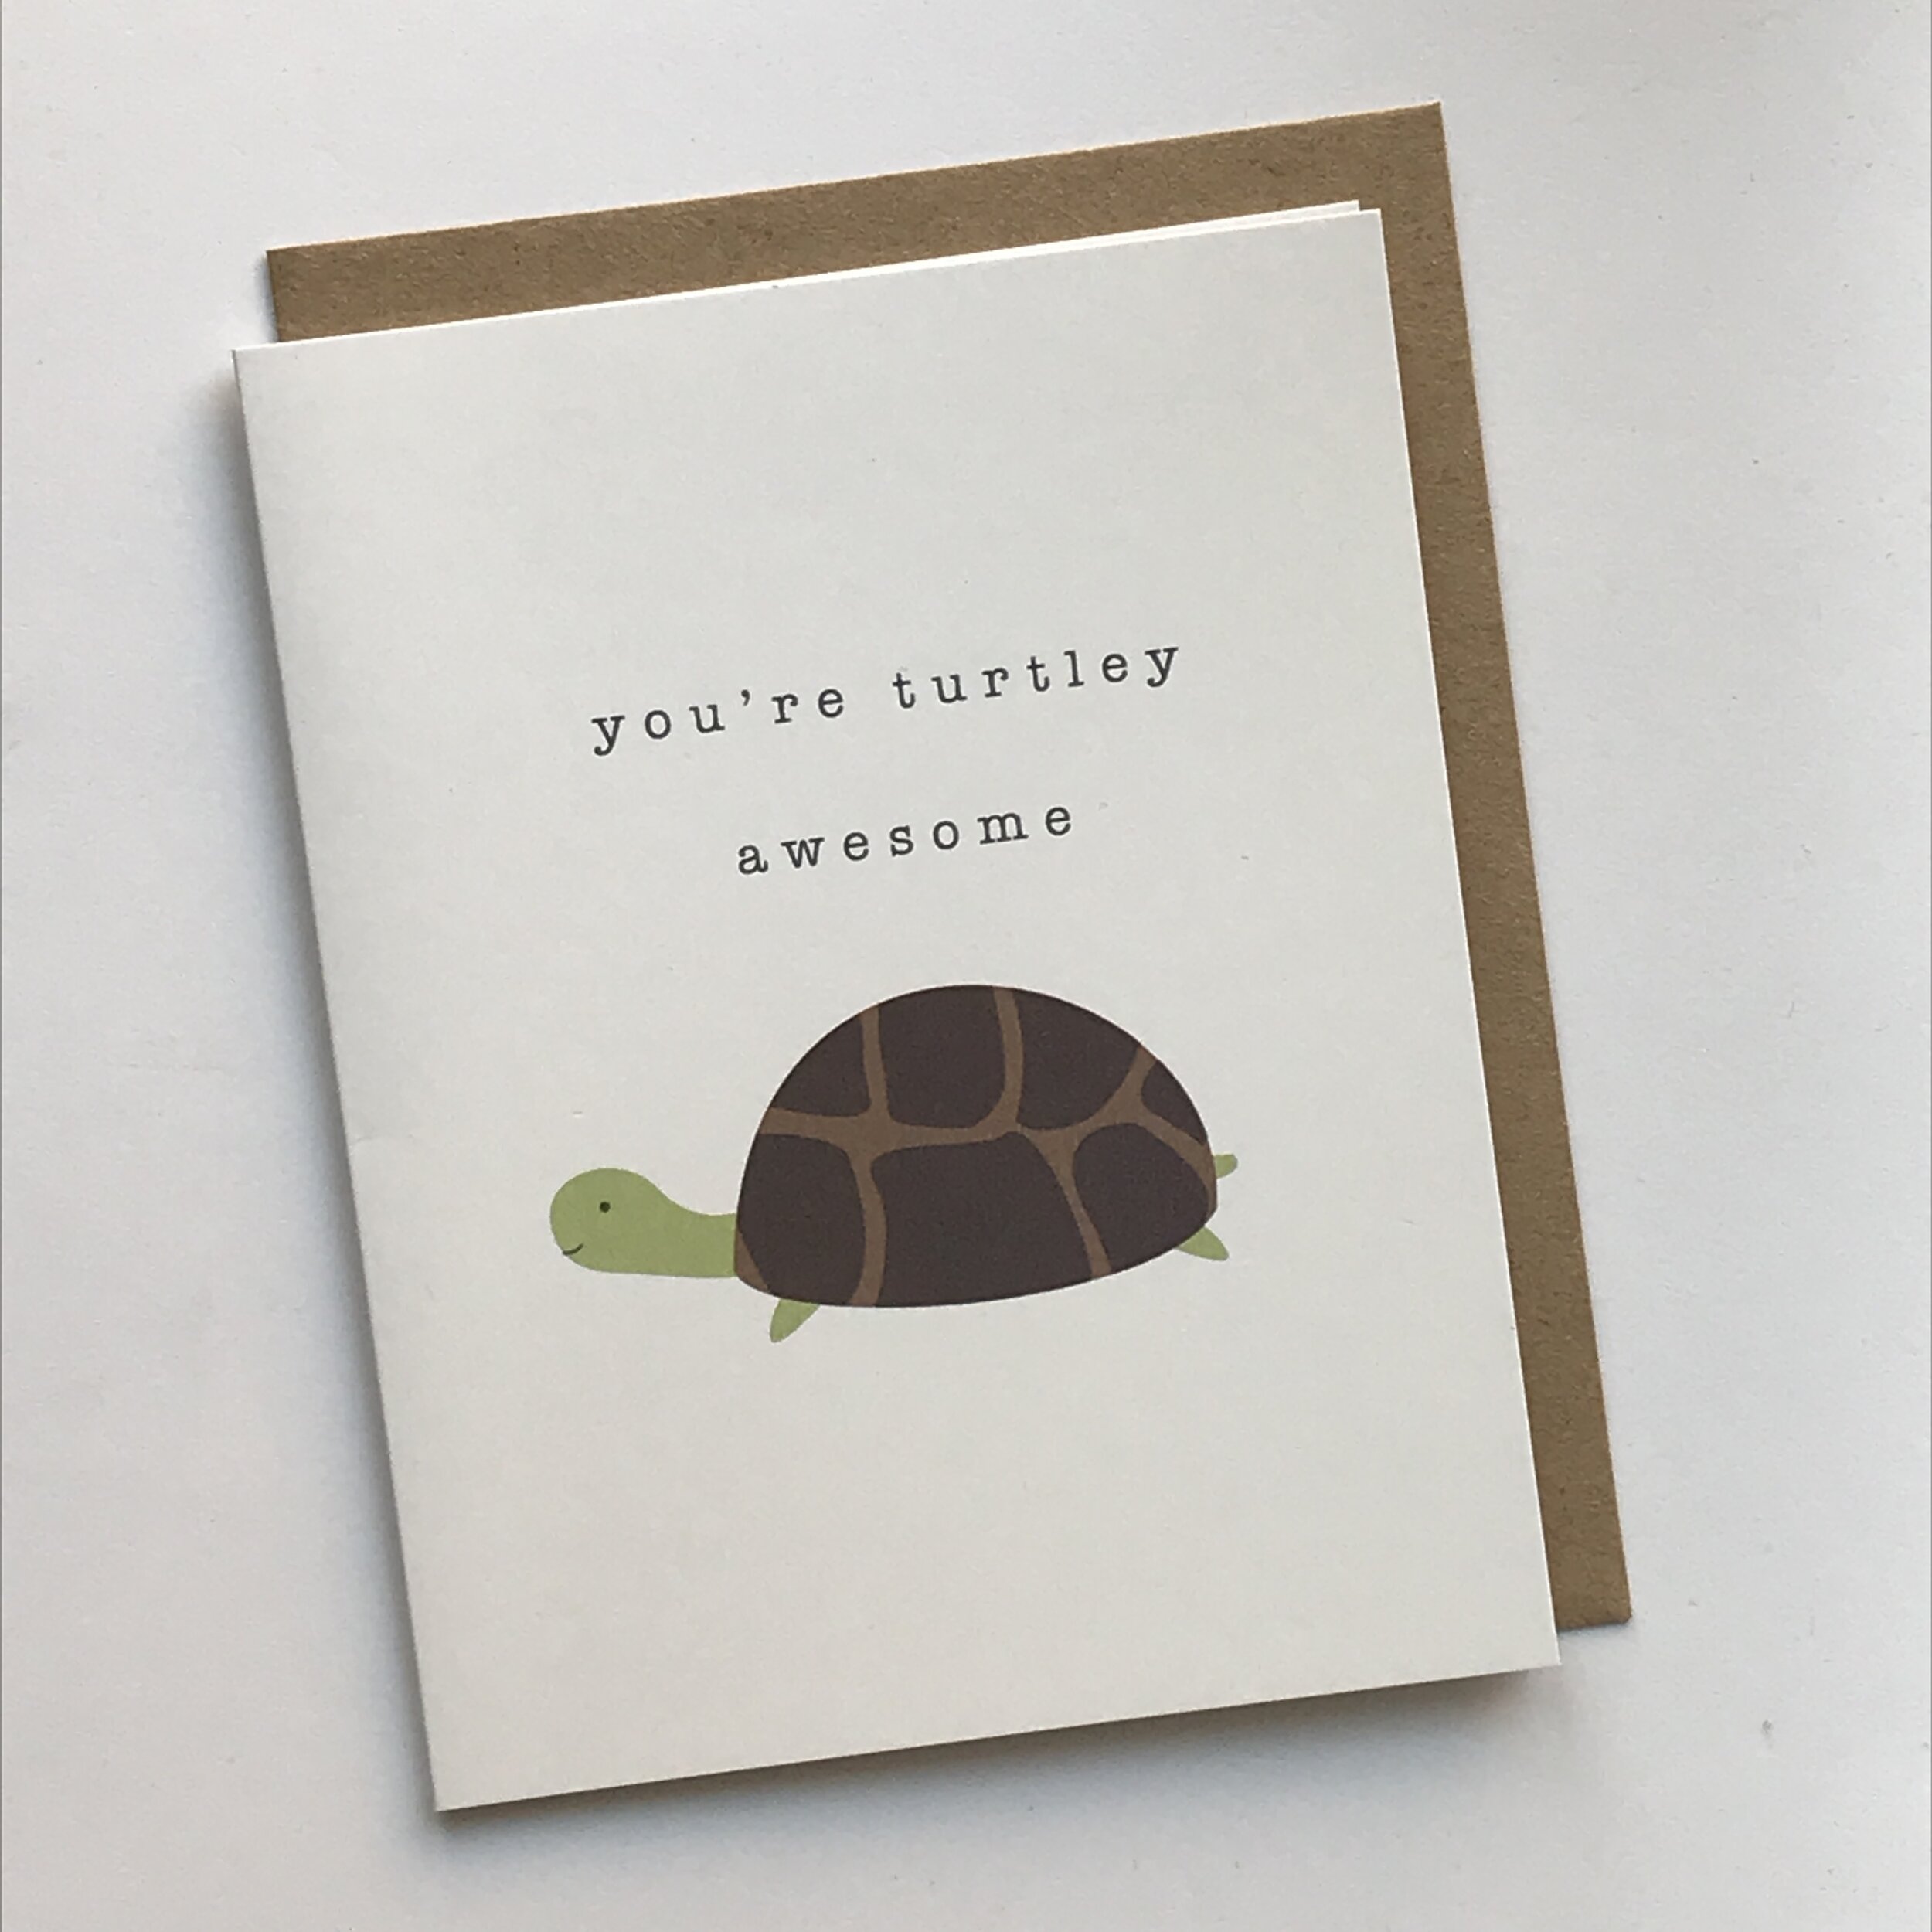 Handmade Thank You Thinking Of You Greetings Card Thank You For Being Turtley Awesome Card